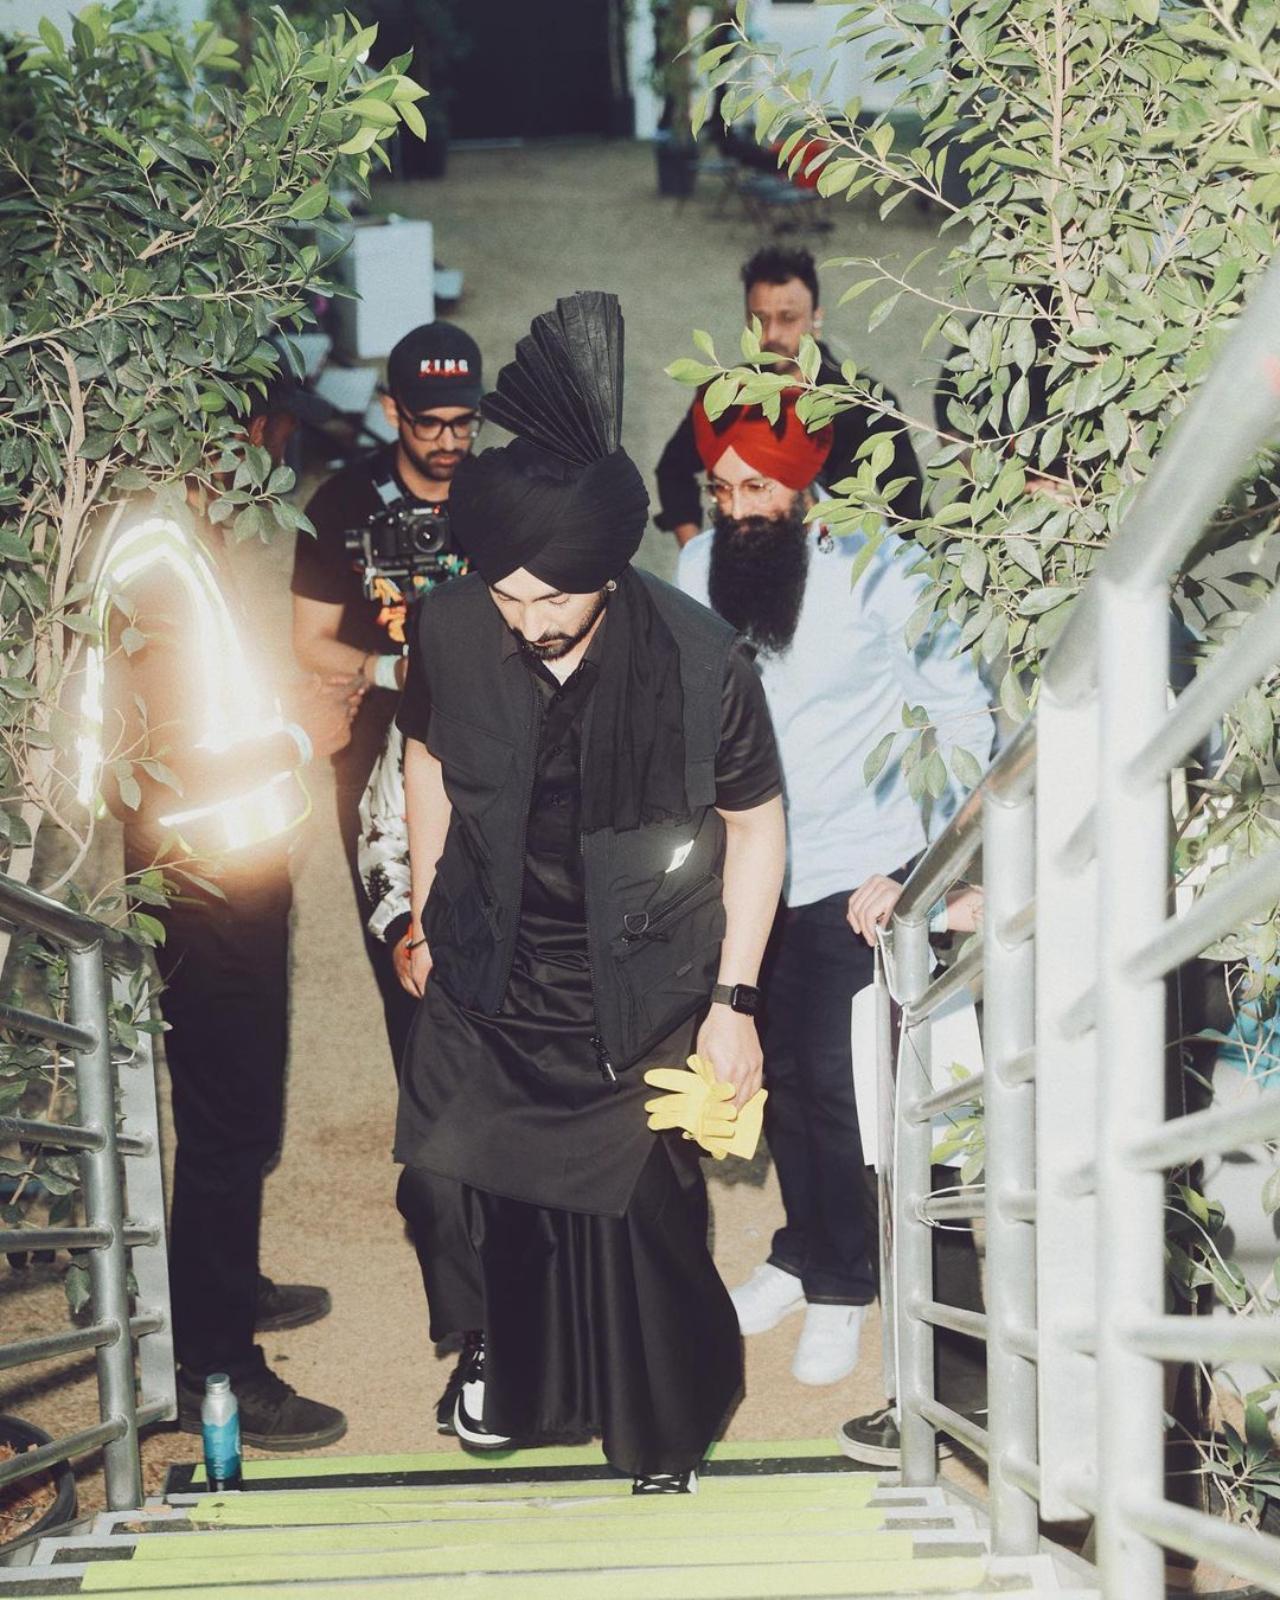 Dressed in an all-black traditional Punjabi attire paired with sneakers, Dosanjh prayed before entering the stage and was welcomed with huge cheer from the fans amid fireworks